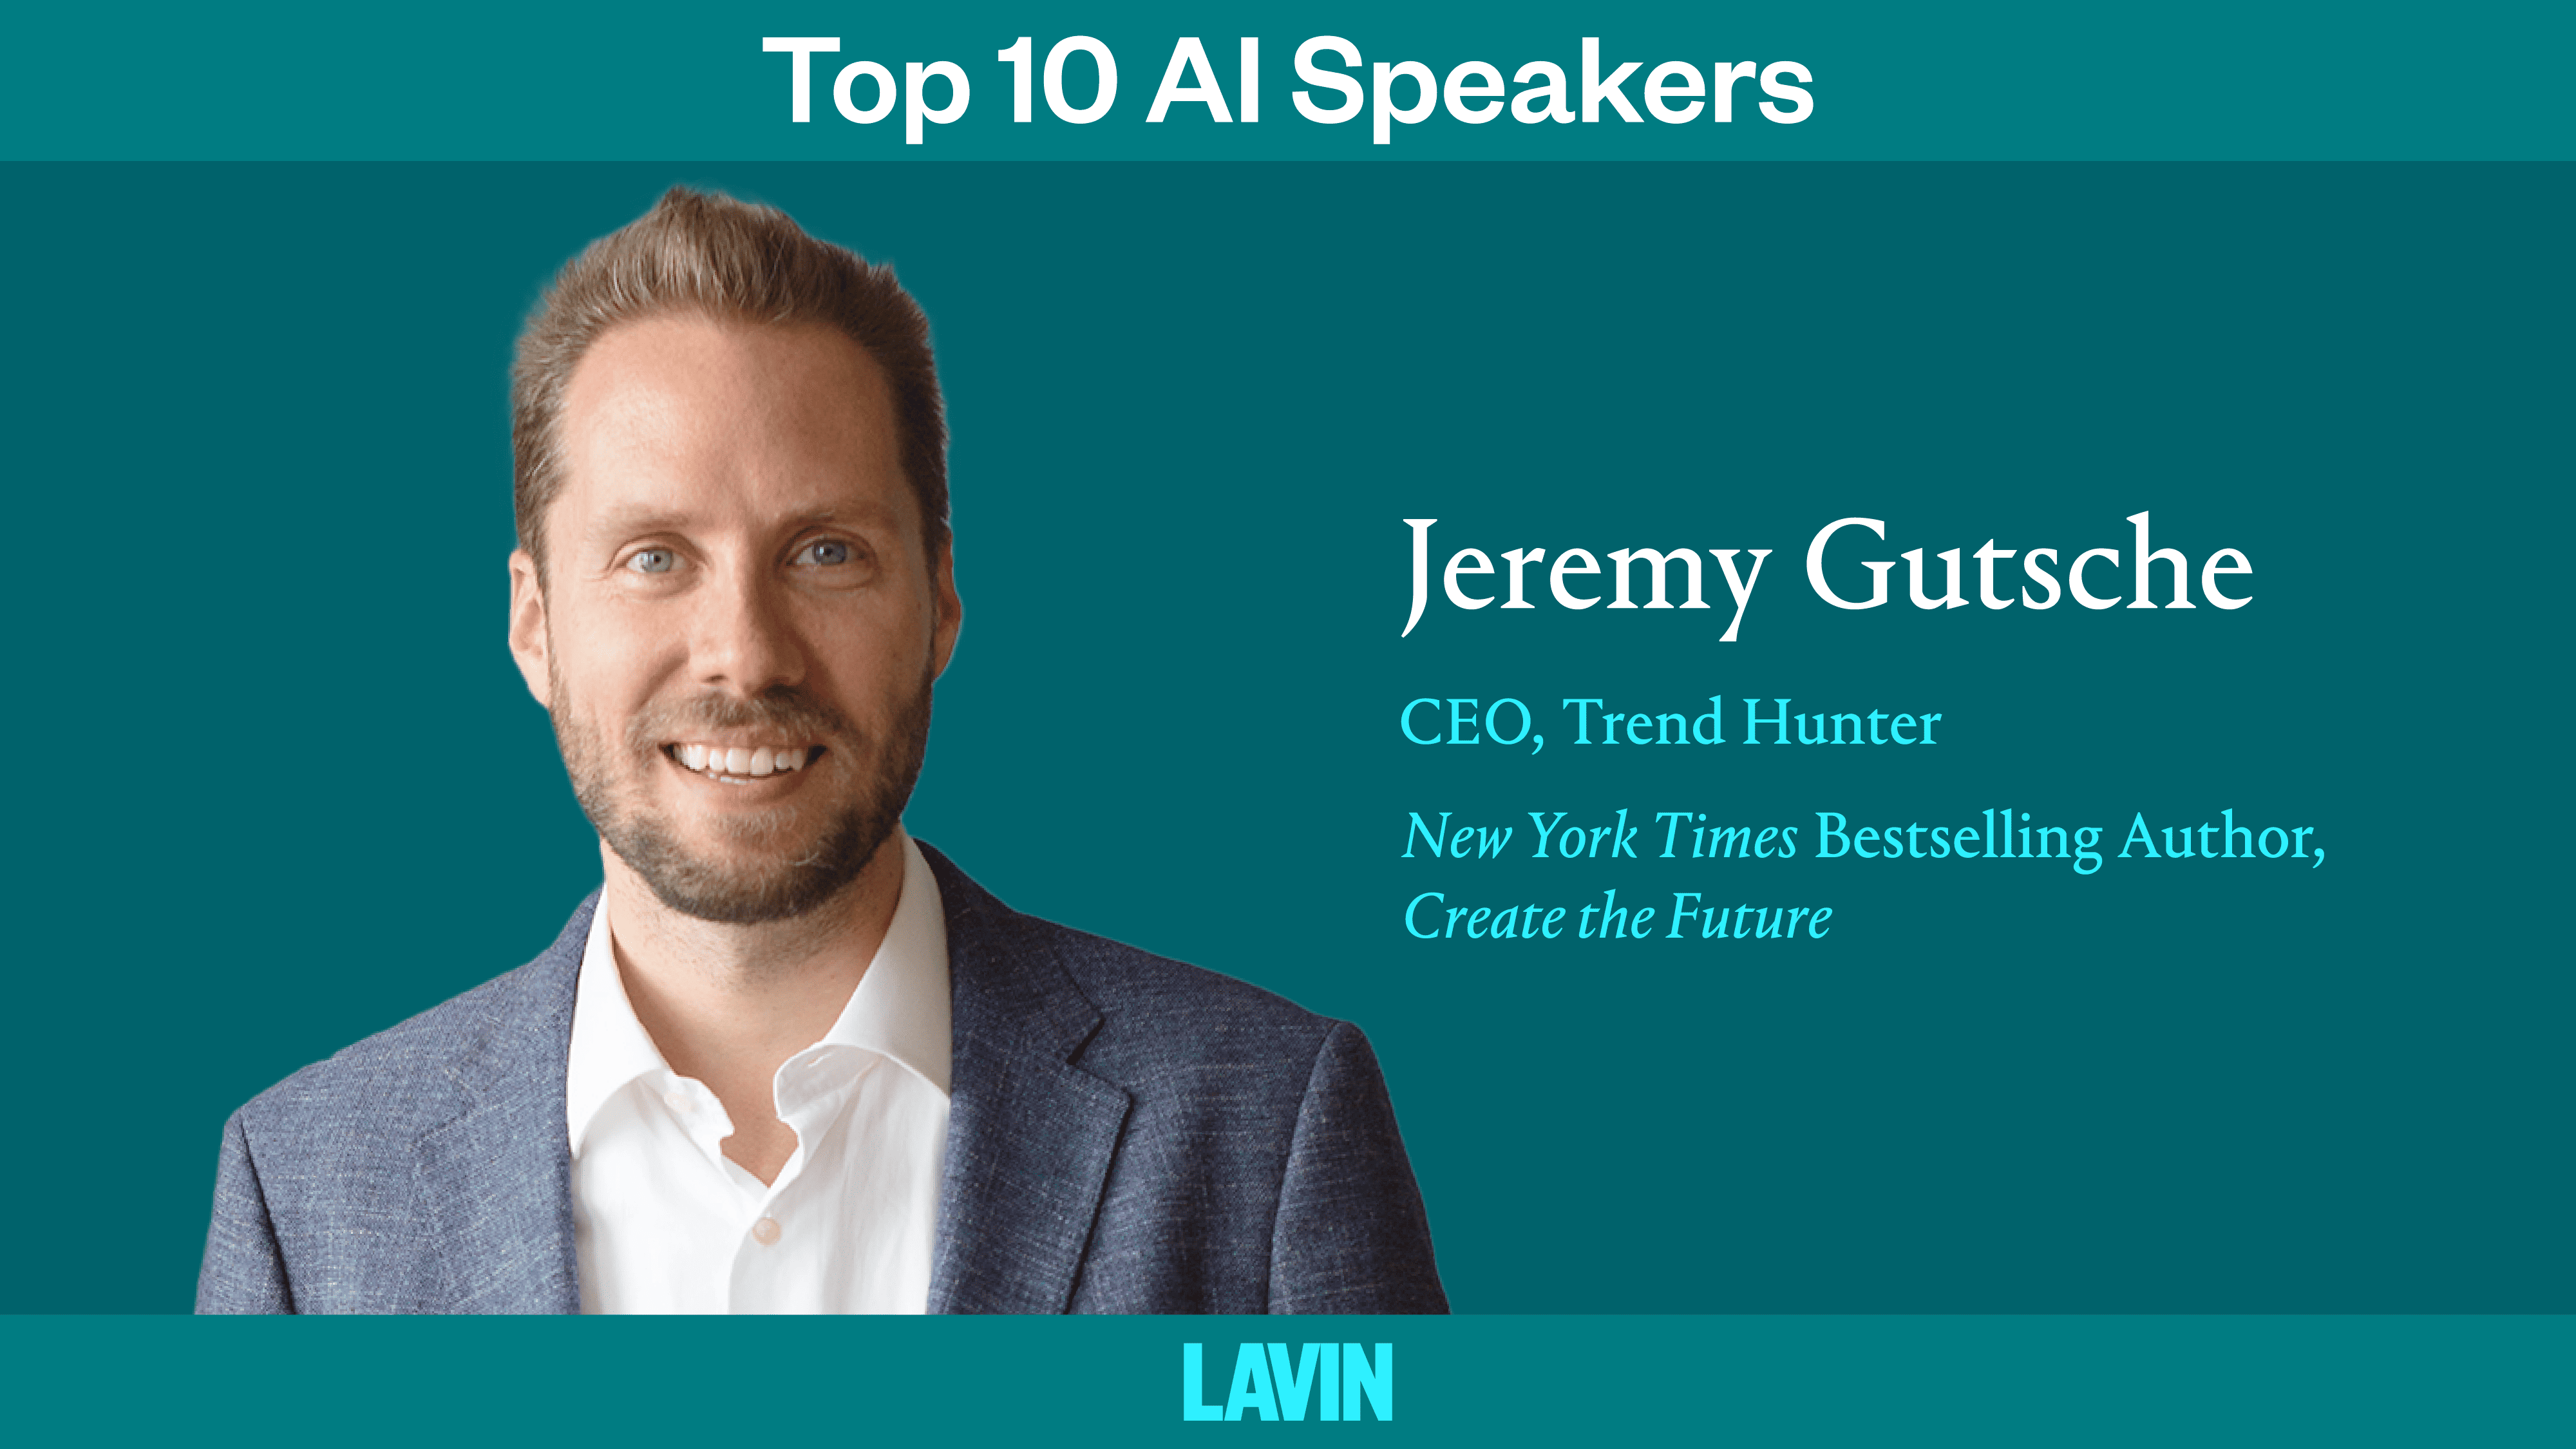 Top 10 AI Speaker Jeremy Gutsche: Make the Chaos of AI Work for You